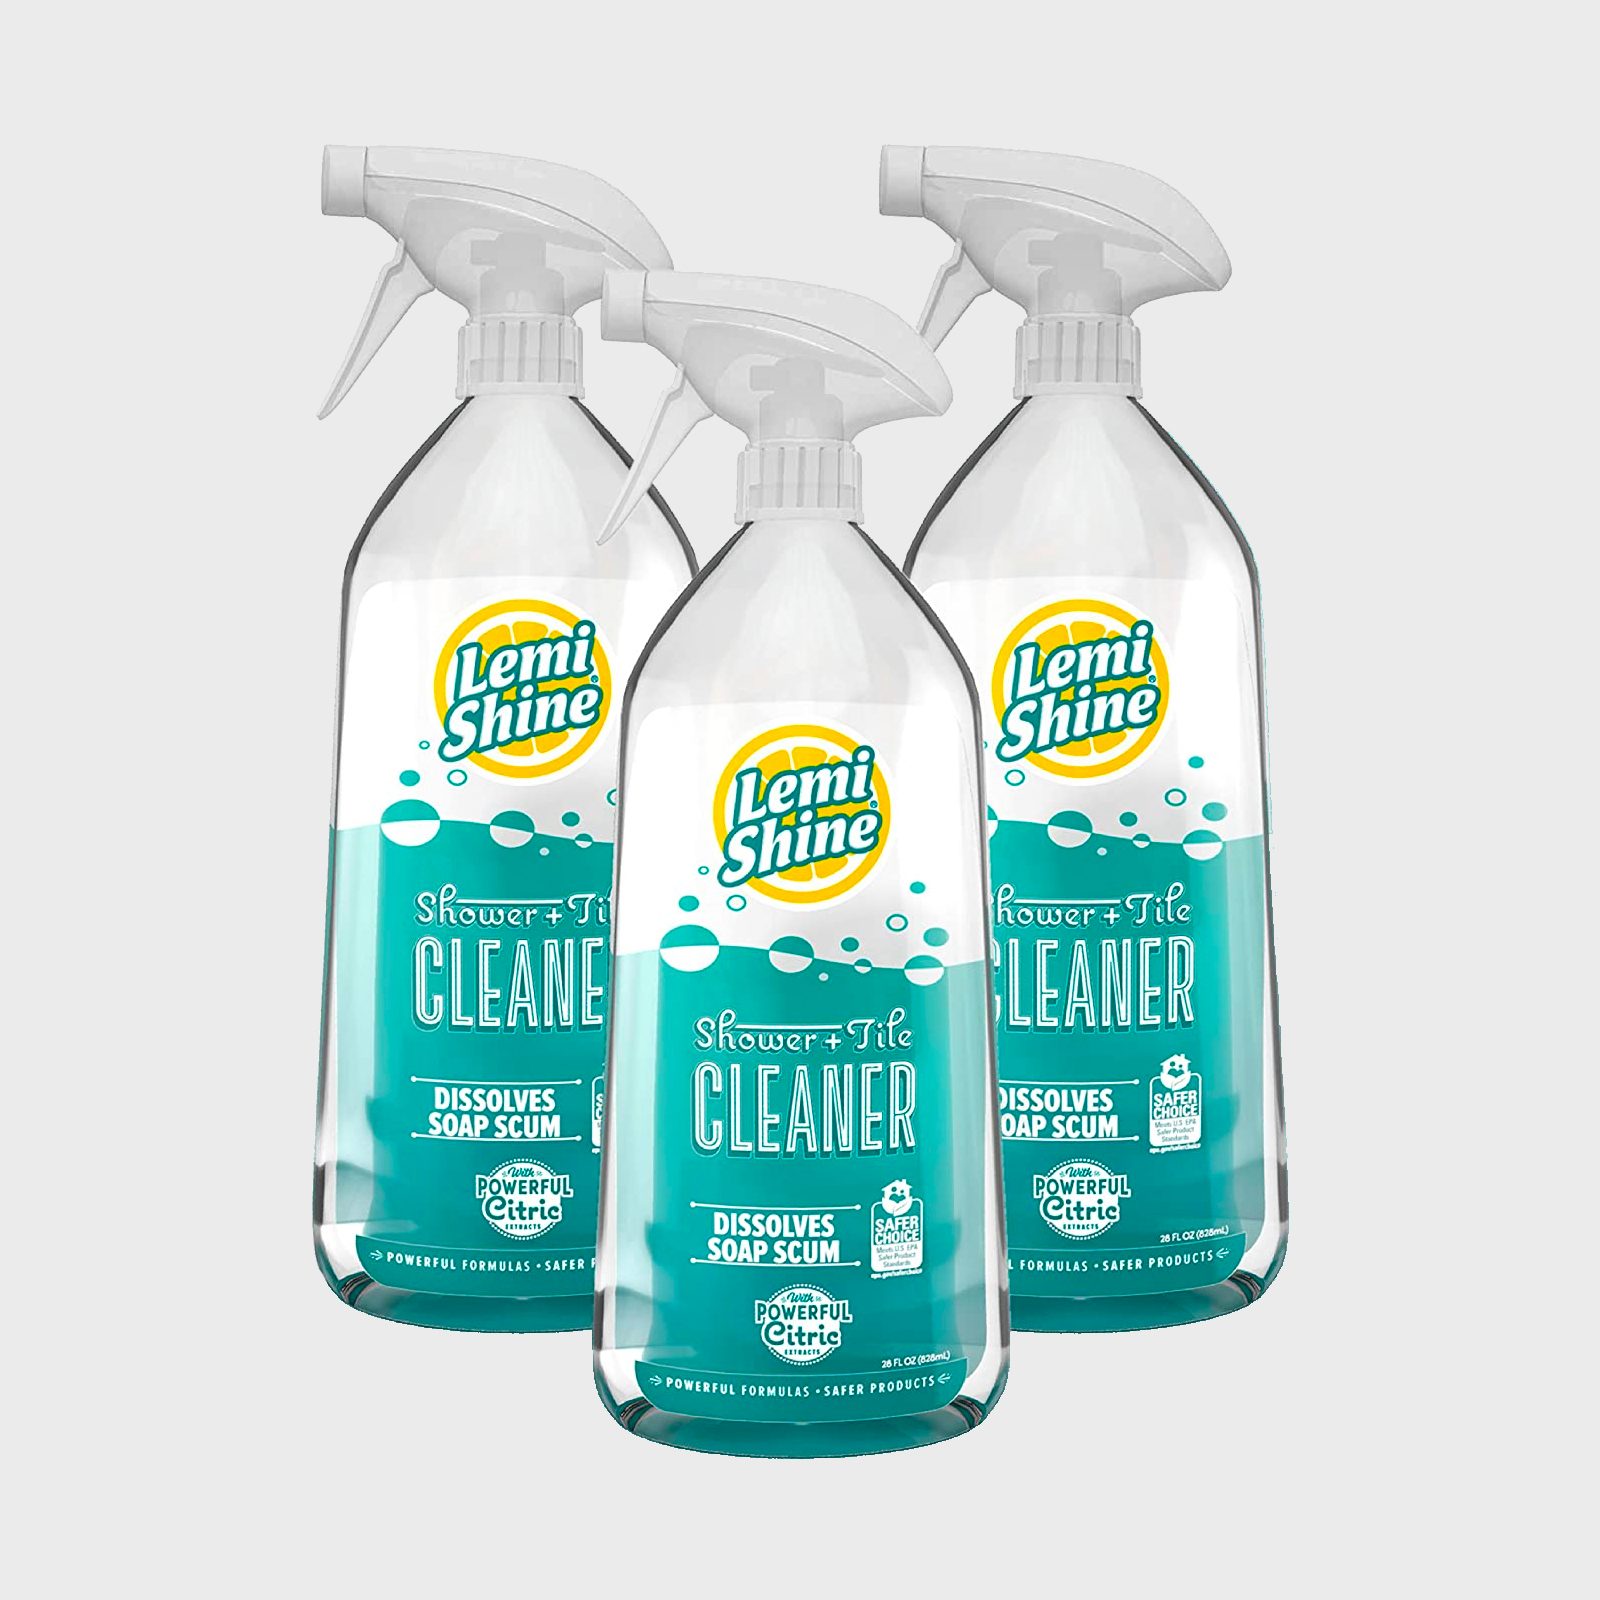 https://www.rd.com/wp-content/uploads/2022/05/RD-12-Eco-Friendly-Cleaning-Products-Ecomm-Lemi-Shine-Shower-Tile-Cleaner.jpg?fit=700%2C700